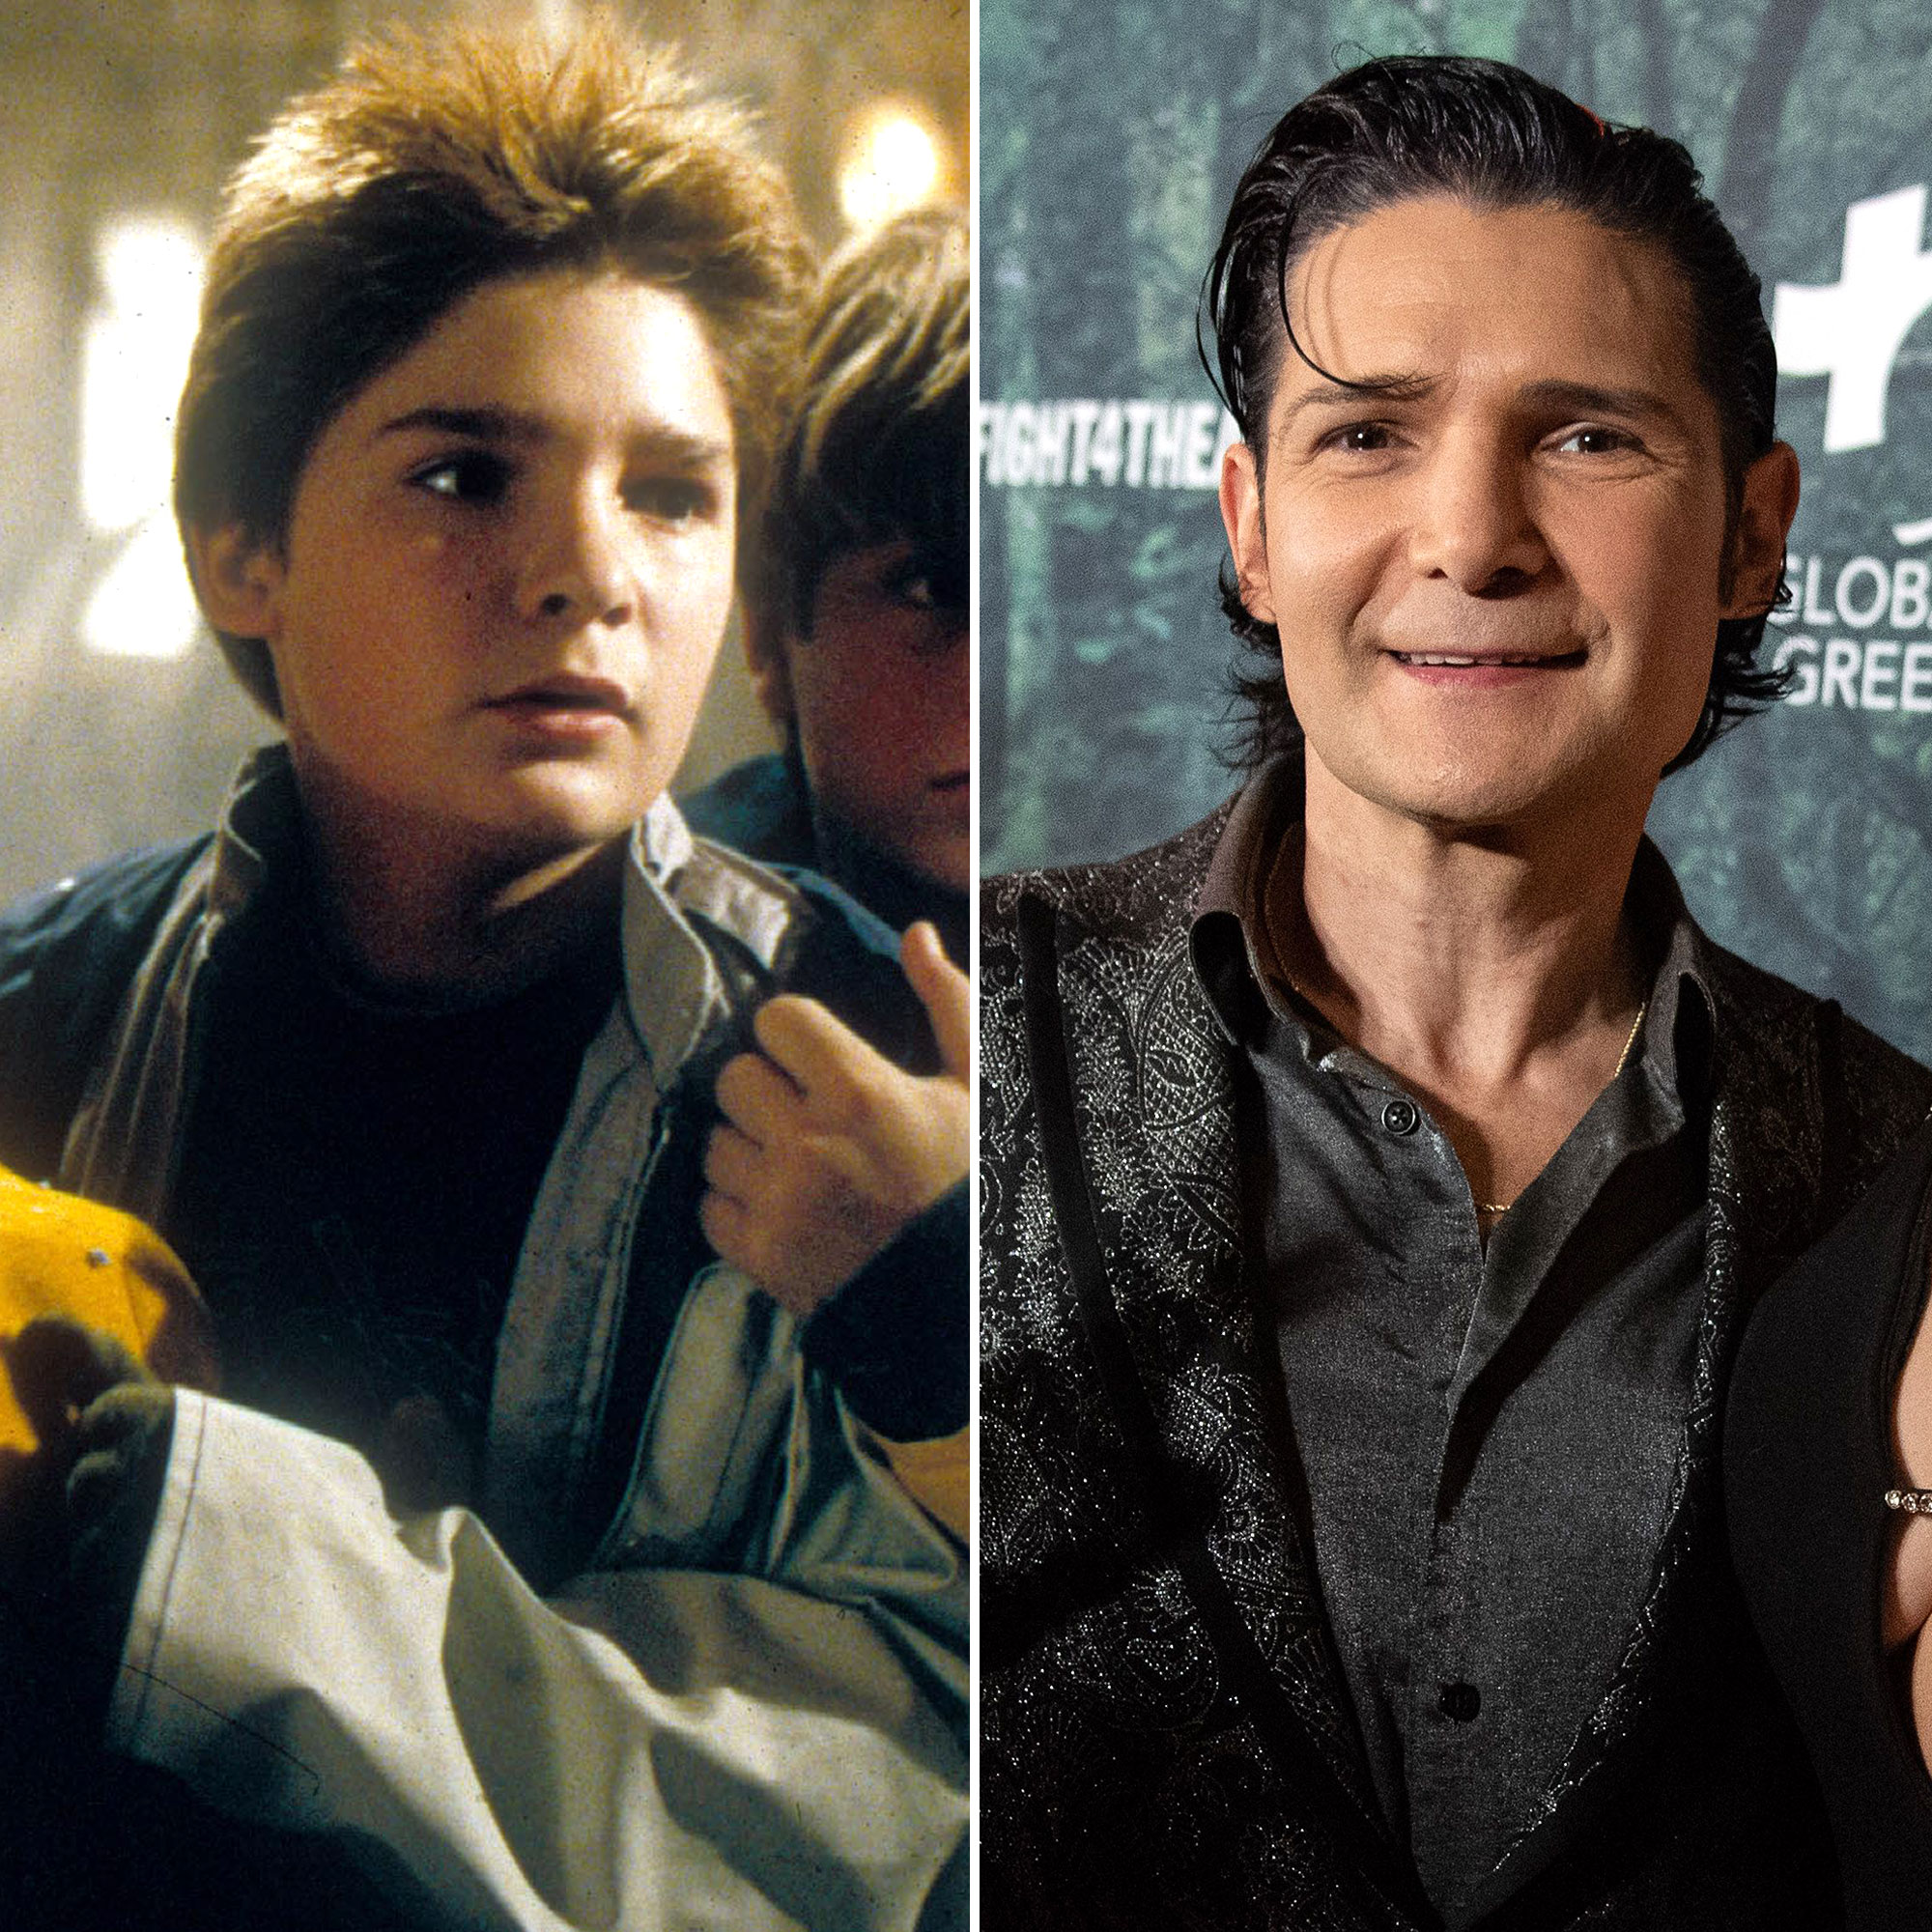 The goonies cast now and then photo - tablehoure